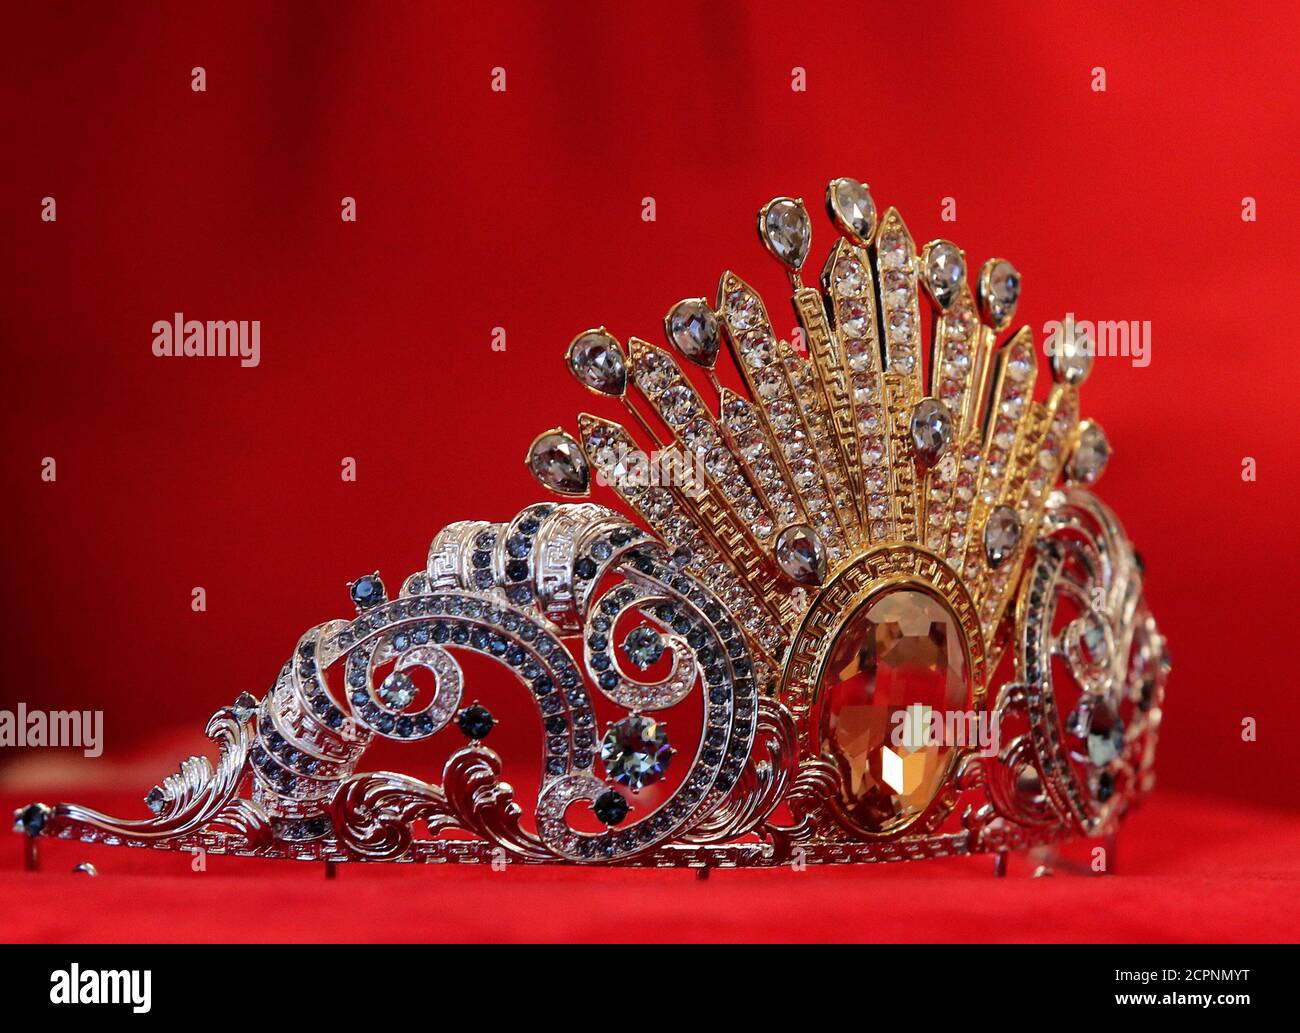 A tiara designed by Donatella Versace, studded with 380 Swarovski crystals  is displayed during the presentation of the debutants' headwear ahead of  the traditional Opera Ball in Vienna, Austria, November 19, 2018.